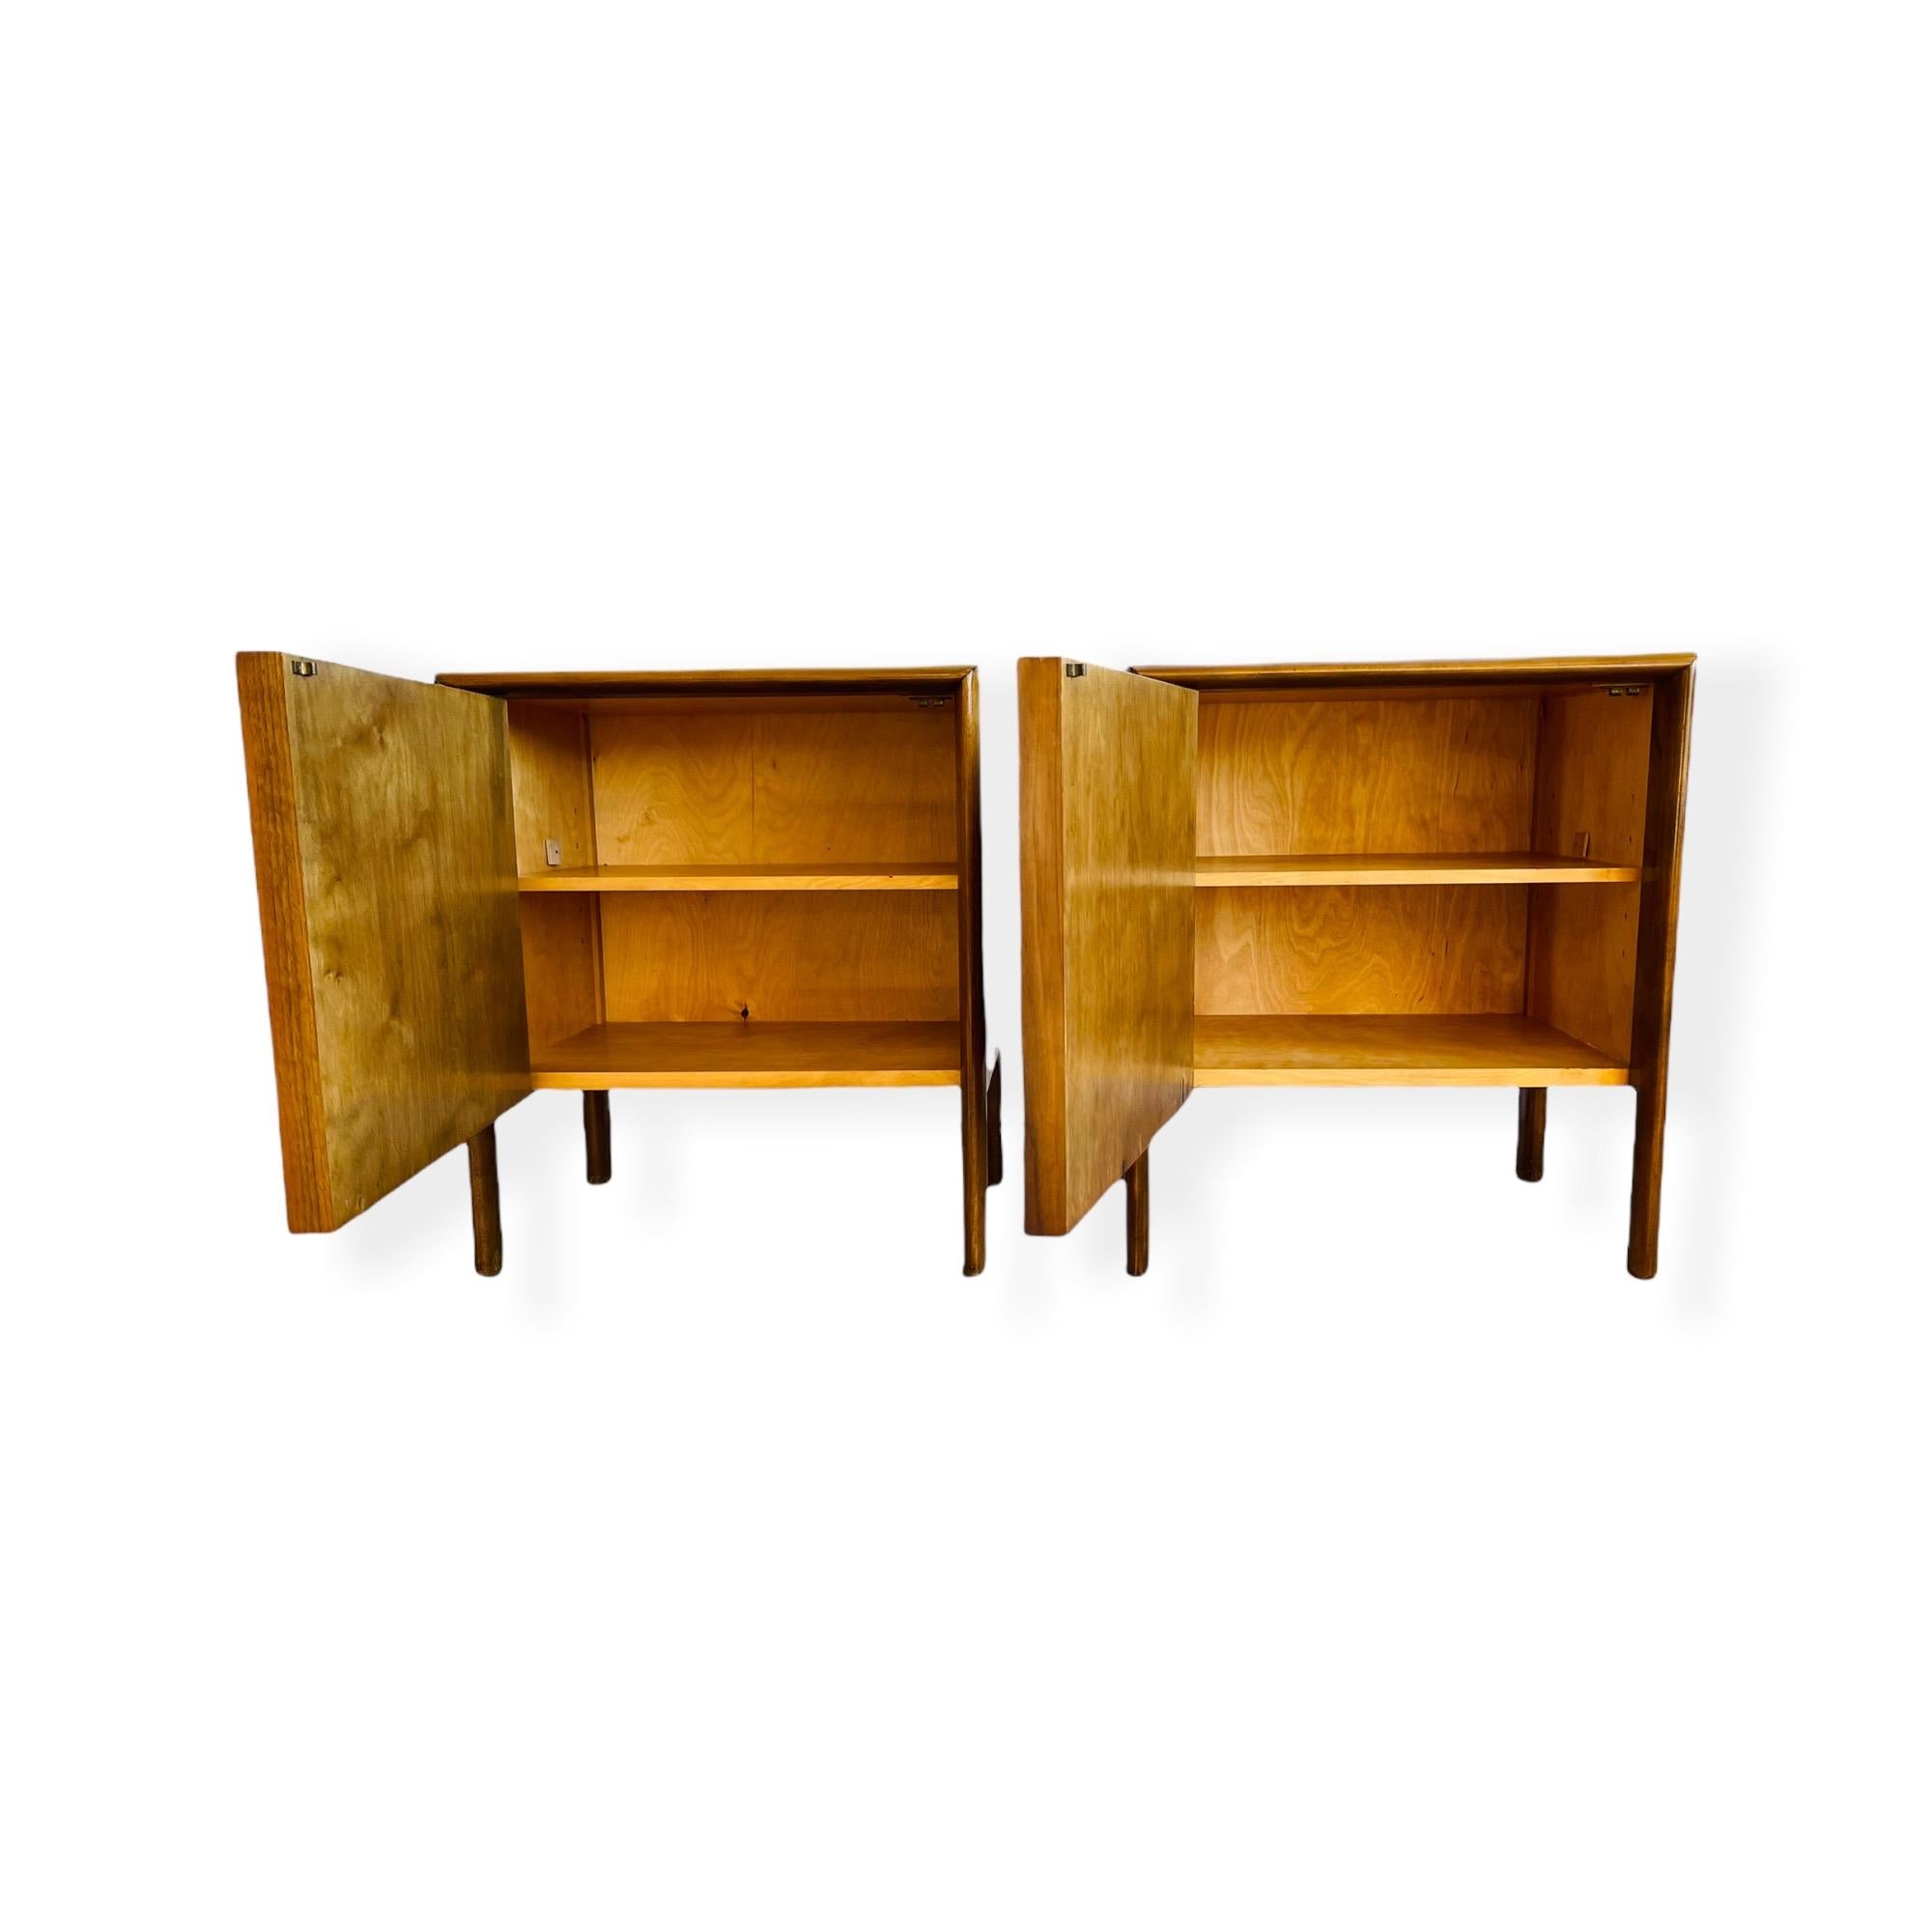 Here is an exceptional pair of mid-century Swedish Modern sculpted walnut nightstands by Edmonds Spence circa 1950s. These nightstands are equipped with sculptured door to open to storage with one shelf. Nightstands are in good vintage condition